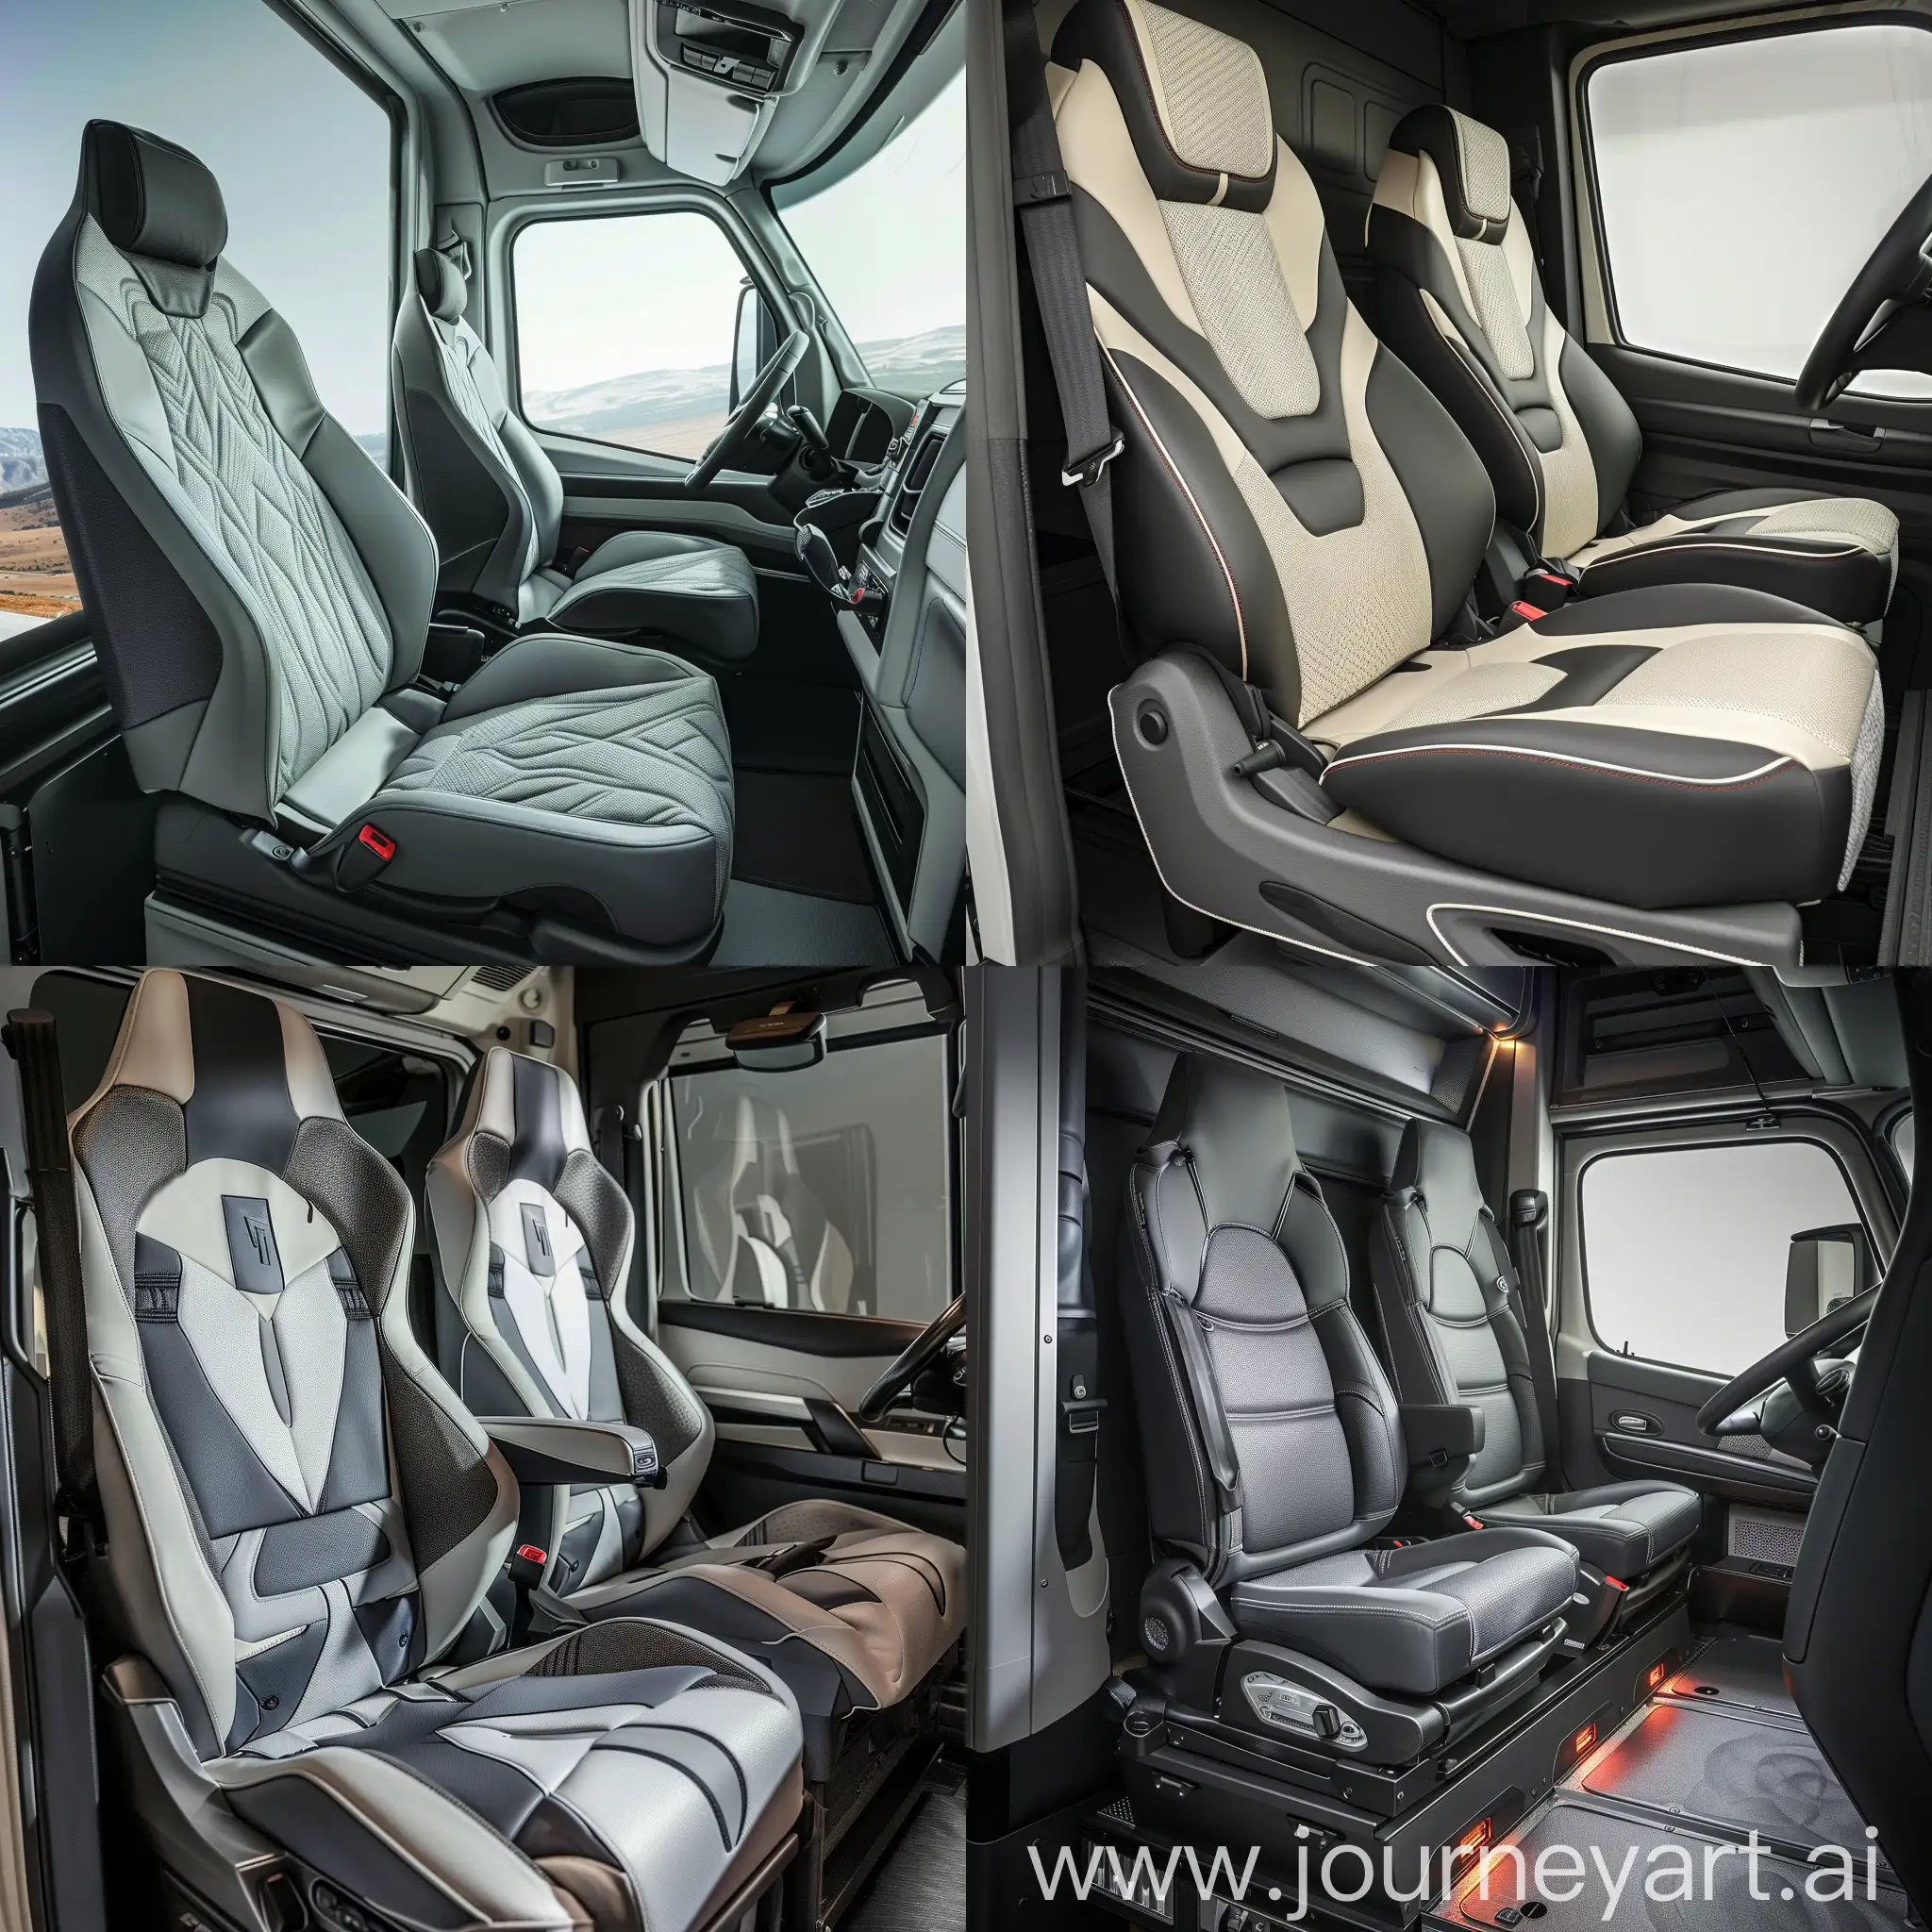 Modern-Truck-Interior-with-Comfortable-Seats-and-Advanced-Technology